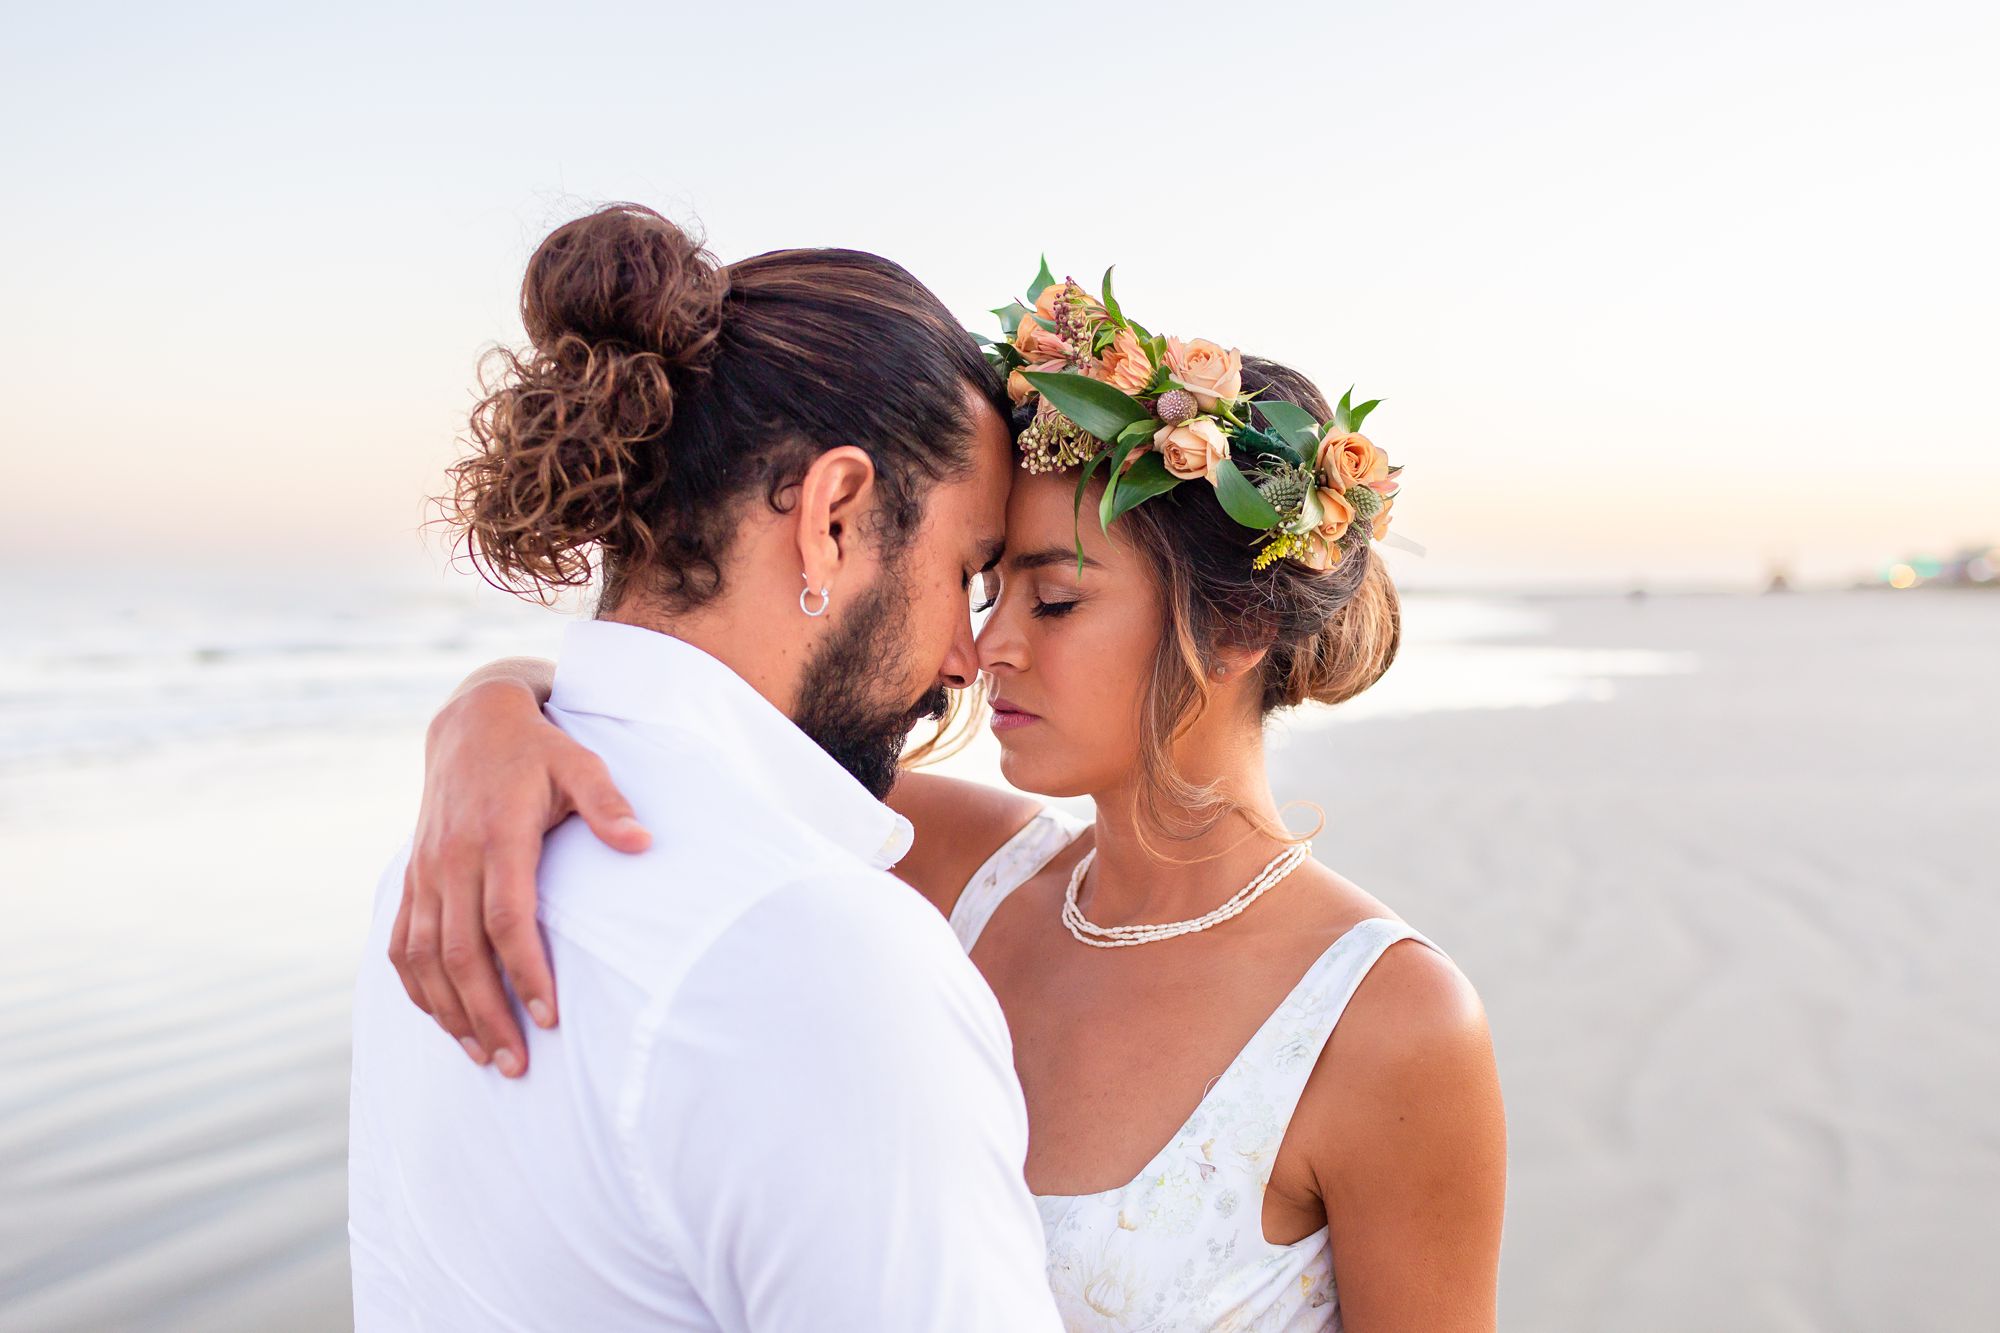 A bride and groom rest their foreheads together while embracing at their Preserve at Grand Beach elopement.